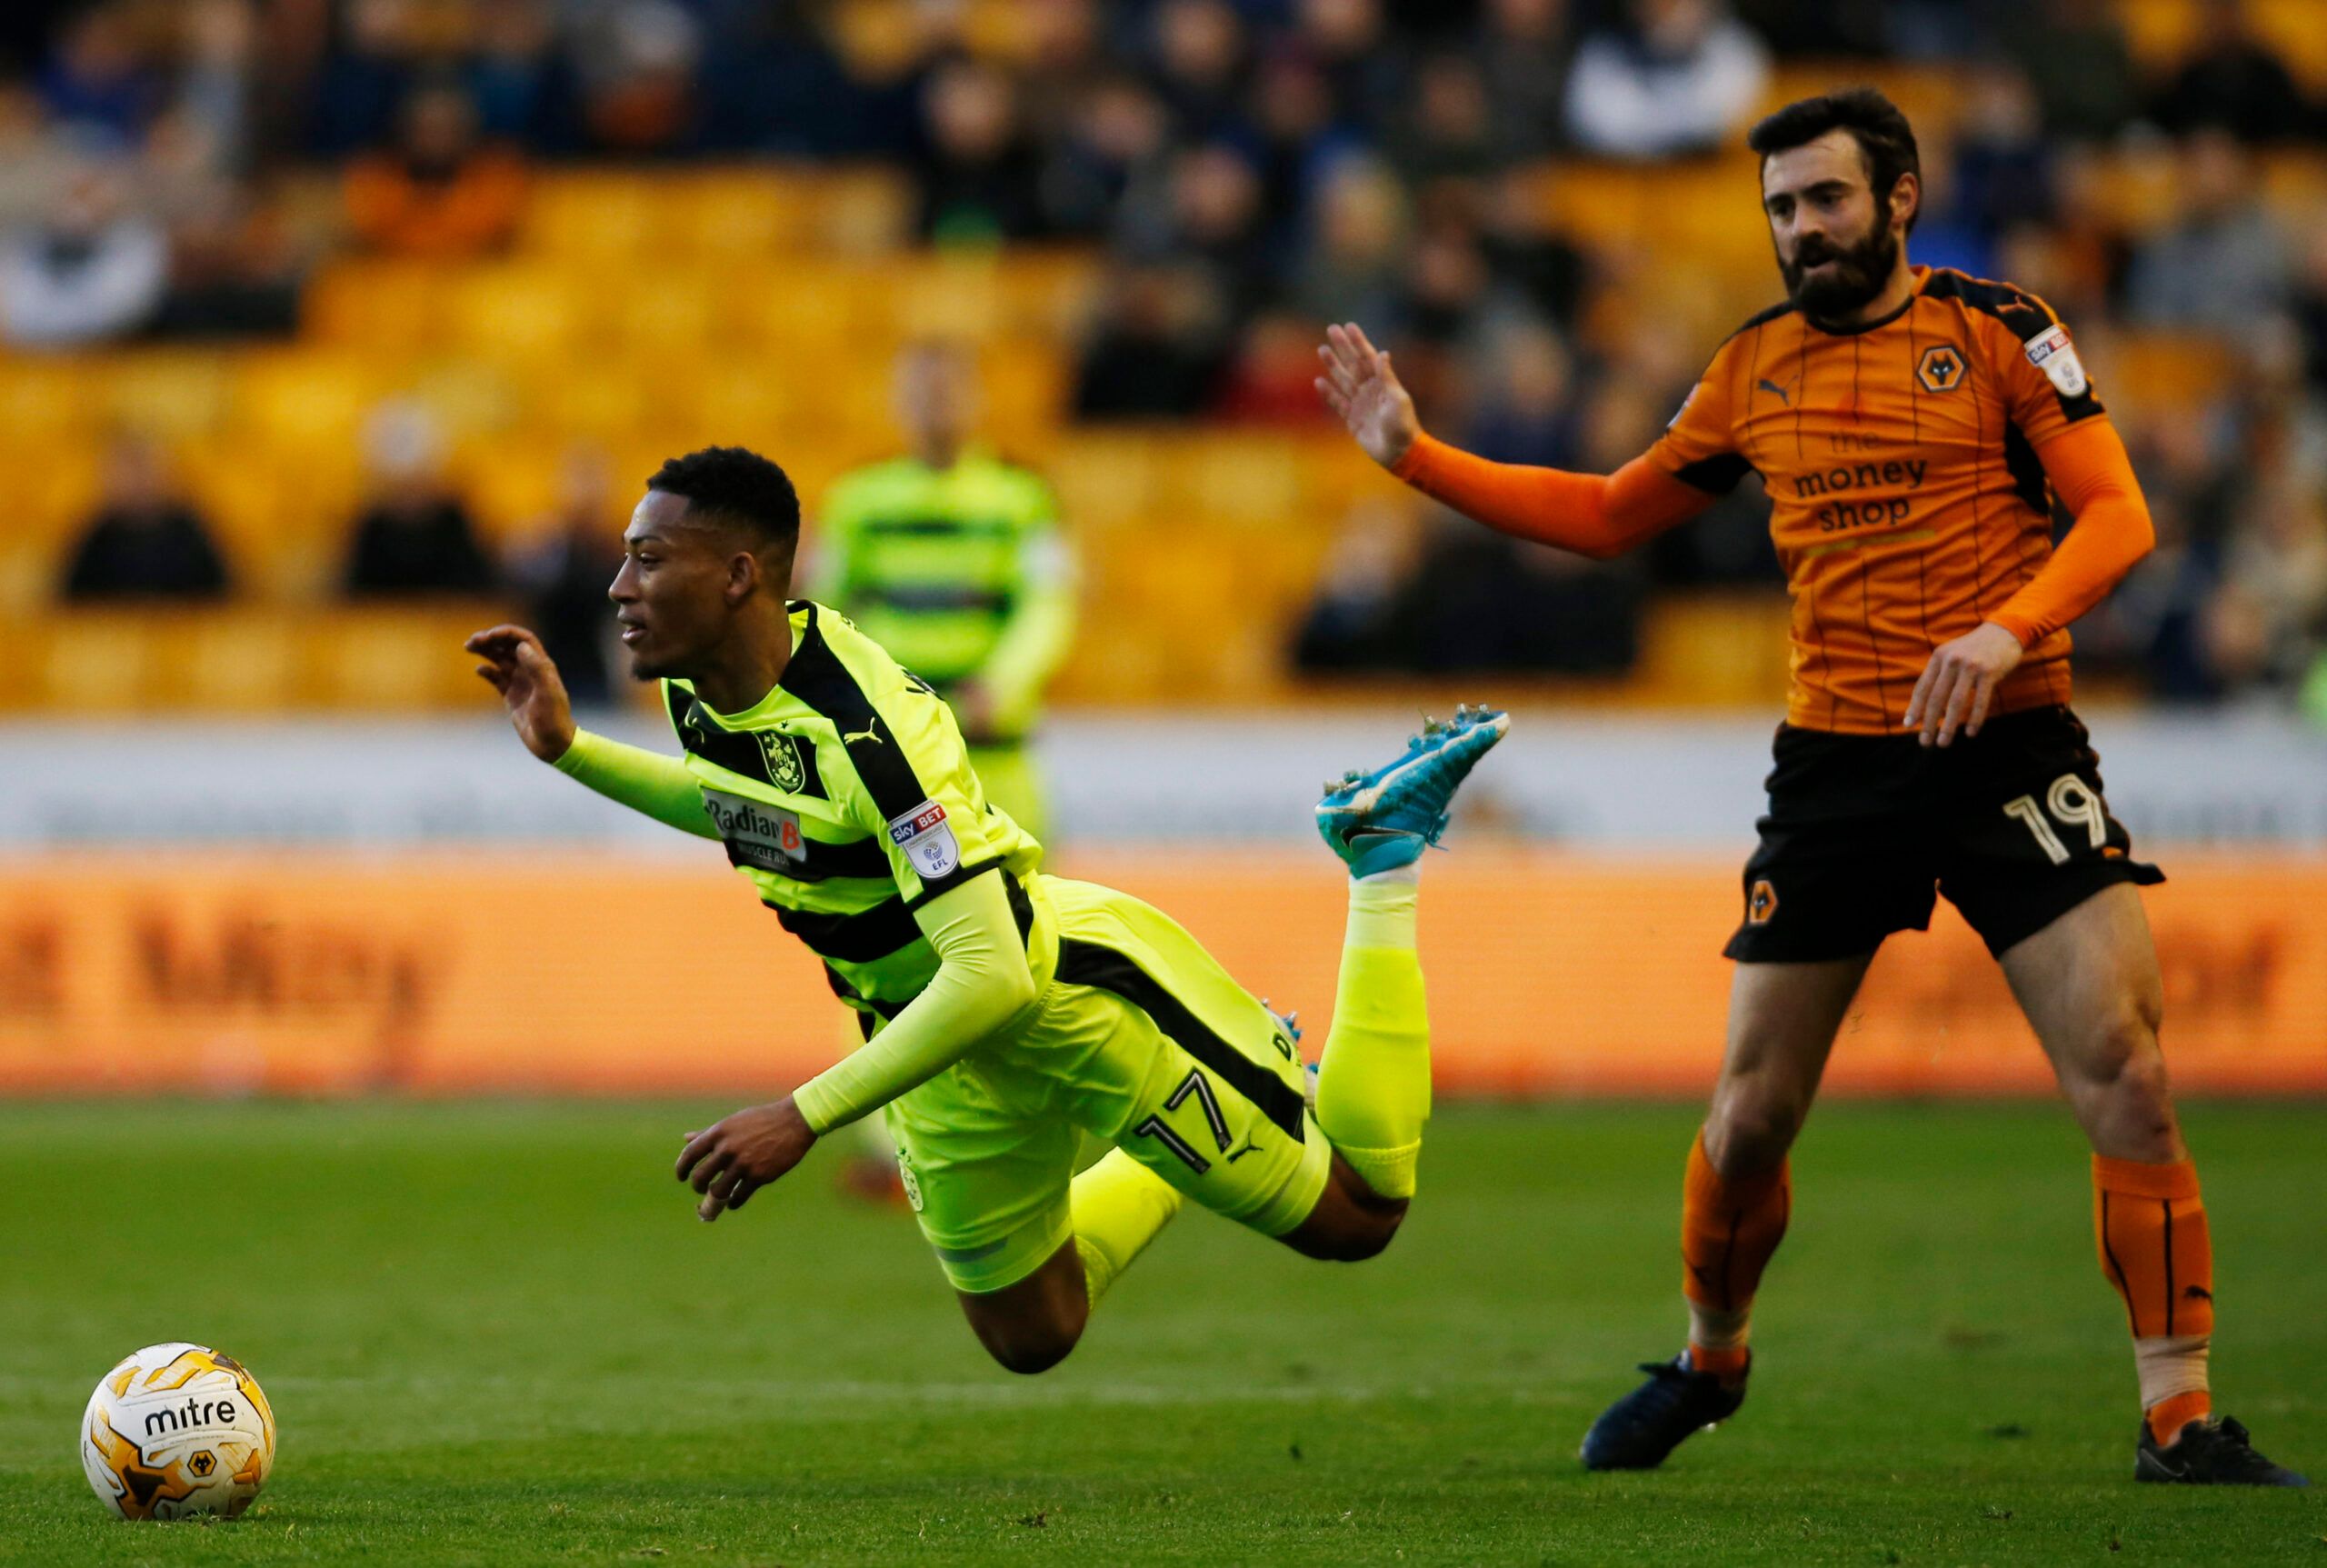 Britain Football Soccer - Wolverhampton Wanderers v Huddersfield Town - Sky Bet Championship - Molineux - 25/4/17 Wolves' Jack Price fouls Huddersfield's Rajiv van La Parra  Mandatory Credit: Action Images / Paul Childs Livepic EDITORIAL USE ONLY. No use with unauthorized audio, video, data, fixture lists, club/league logos or 